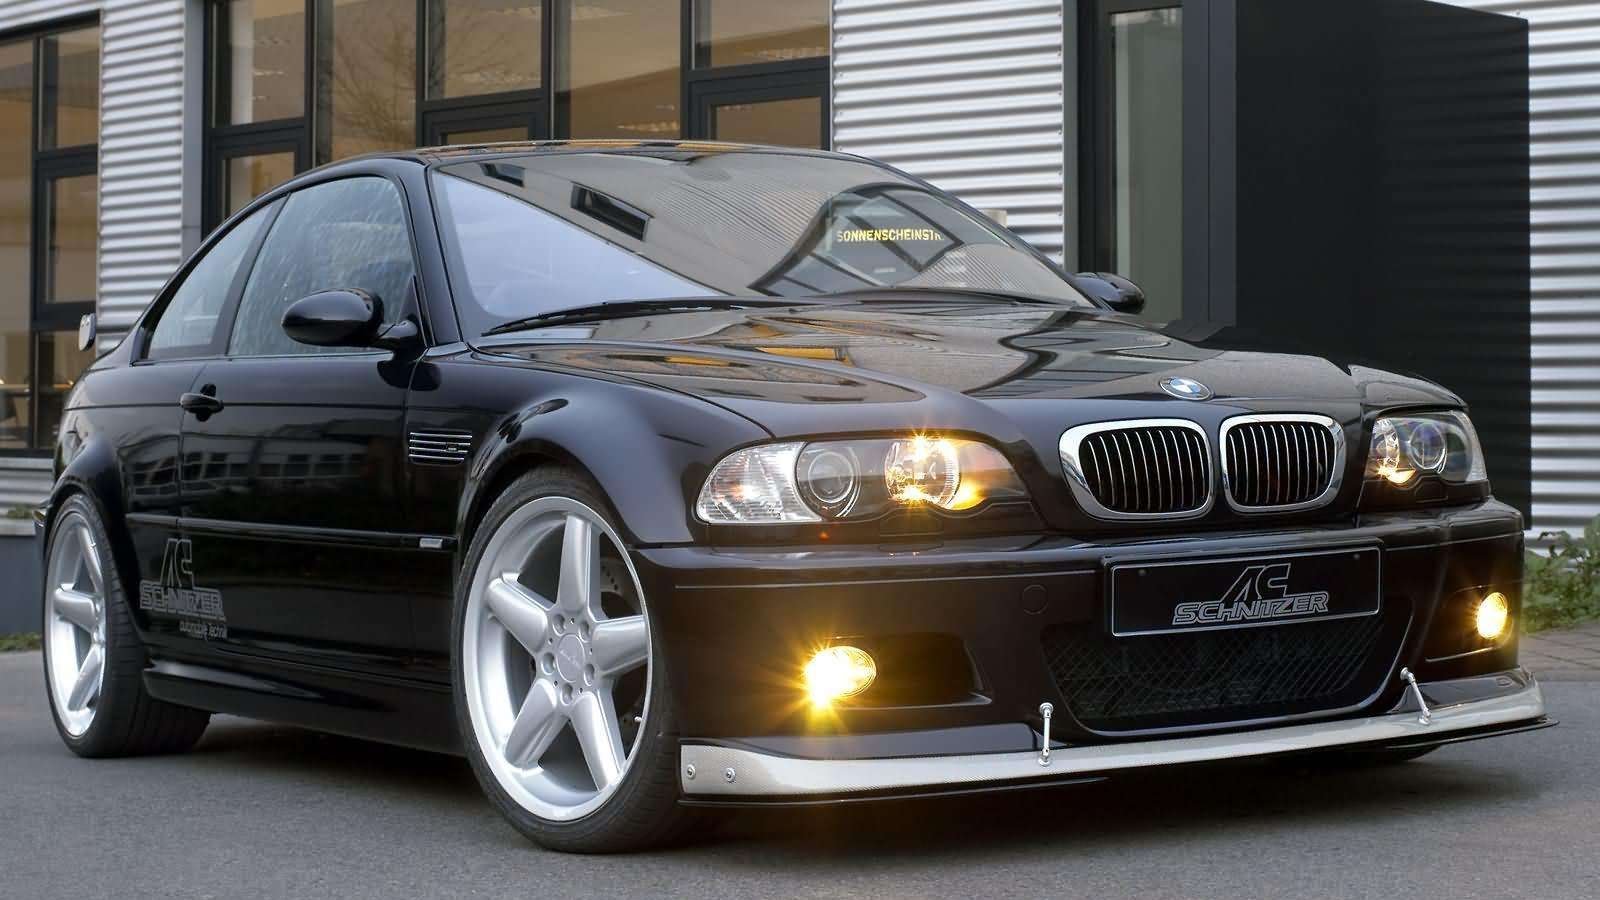 HQ Bmw E46 Ac Schnitzer Wallpapers | File 142.35Kb